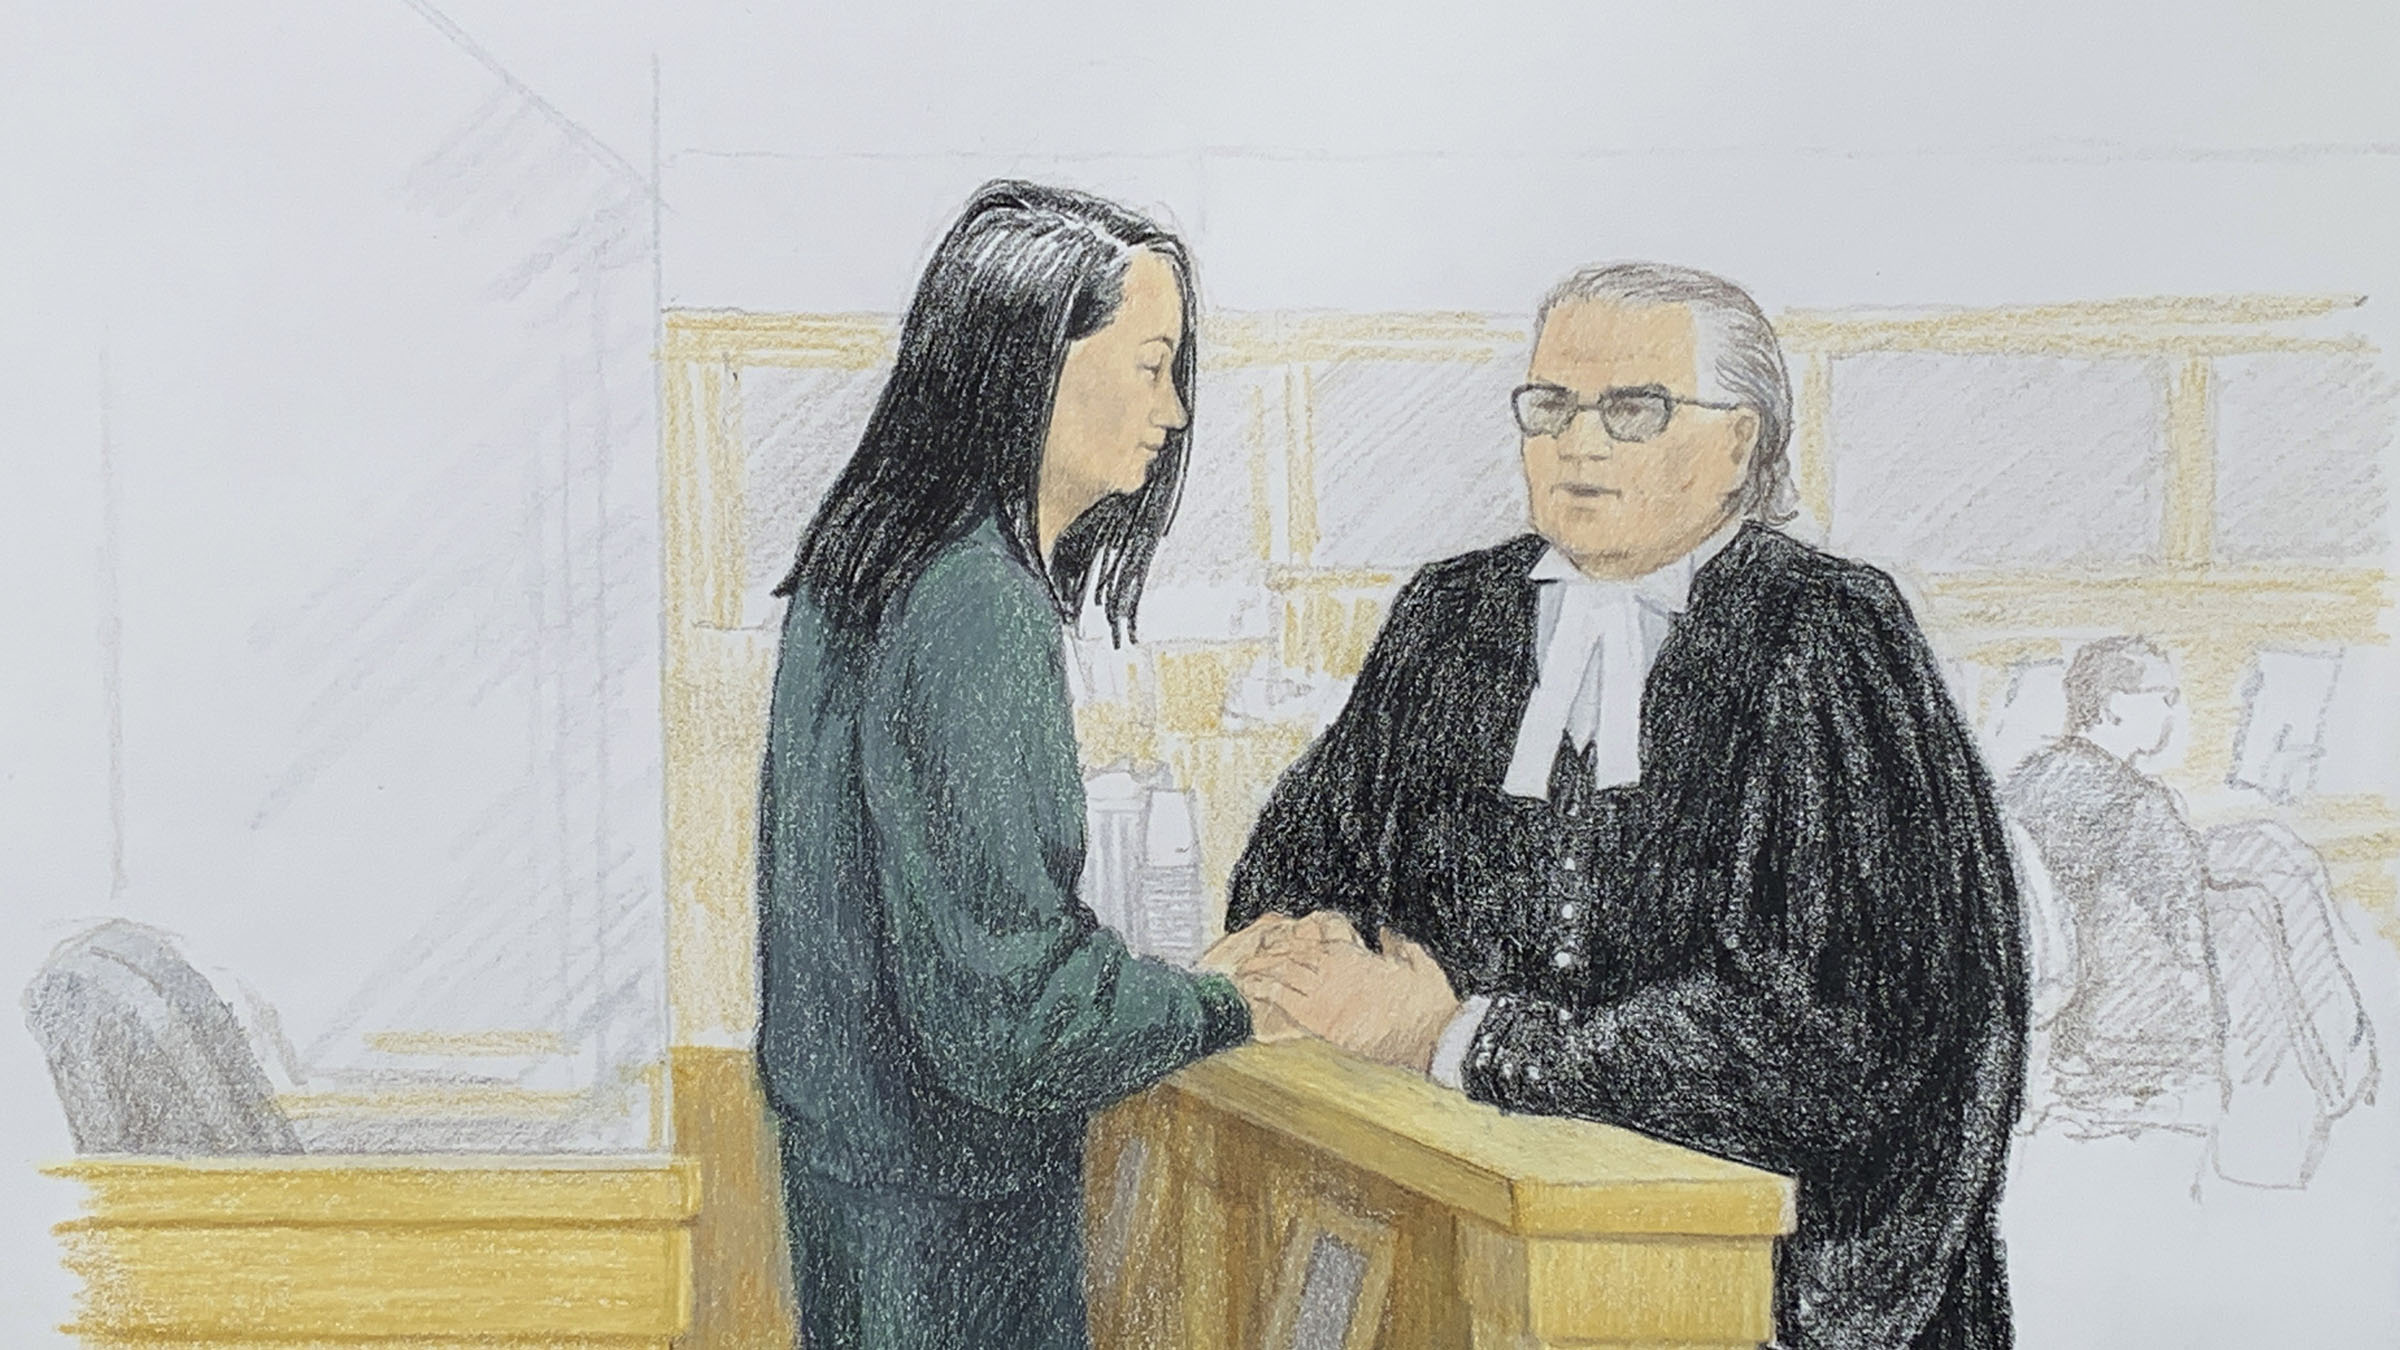 Canada judge grants bail to Huawei Technologies CFO in US extradition case